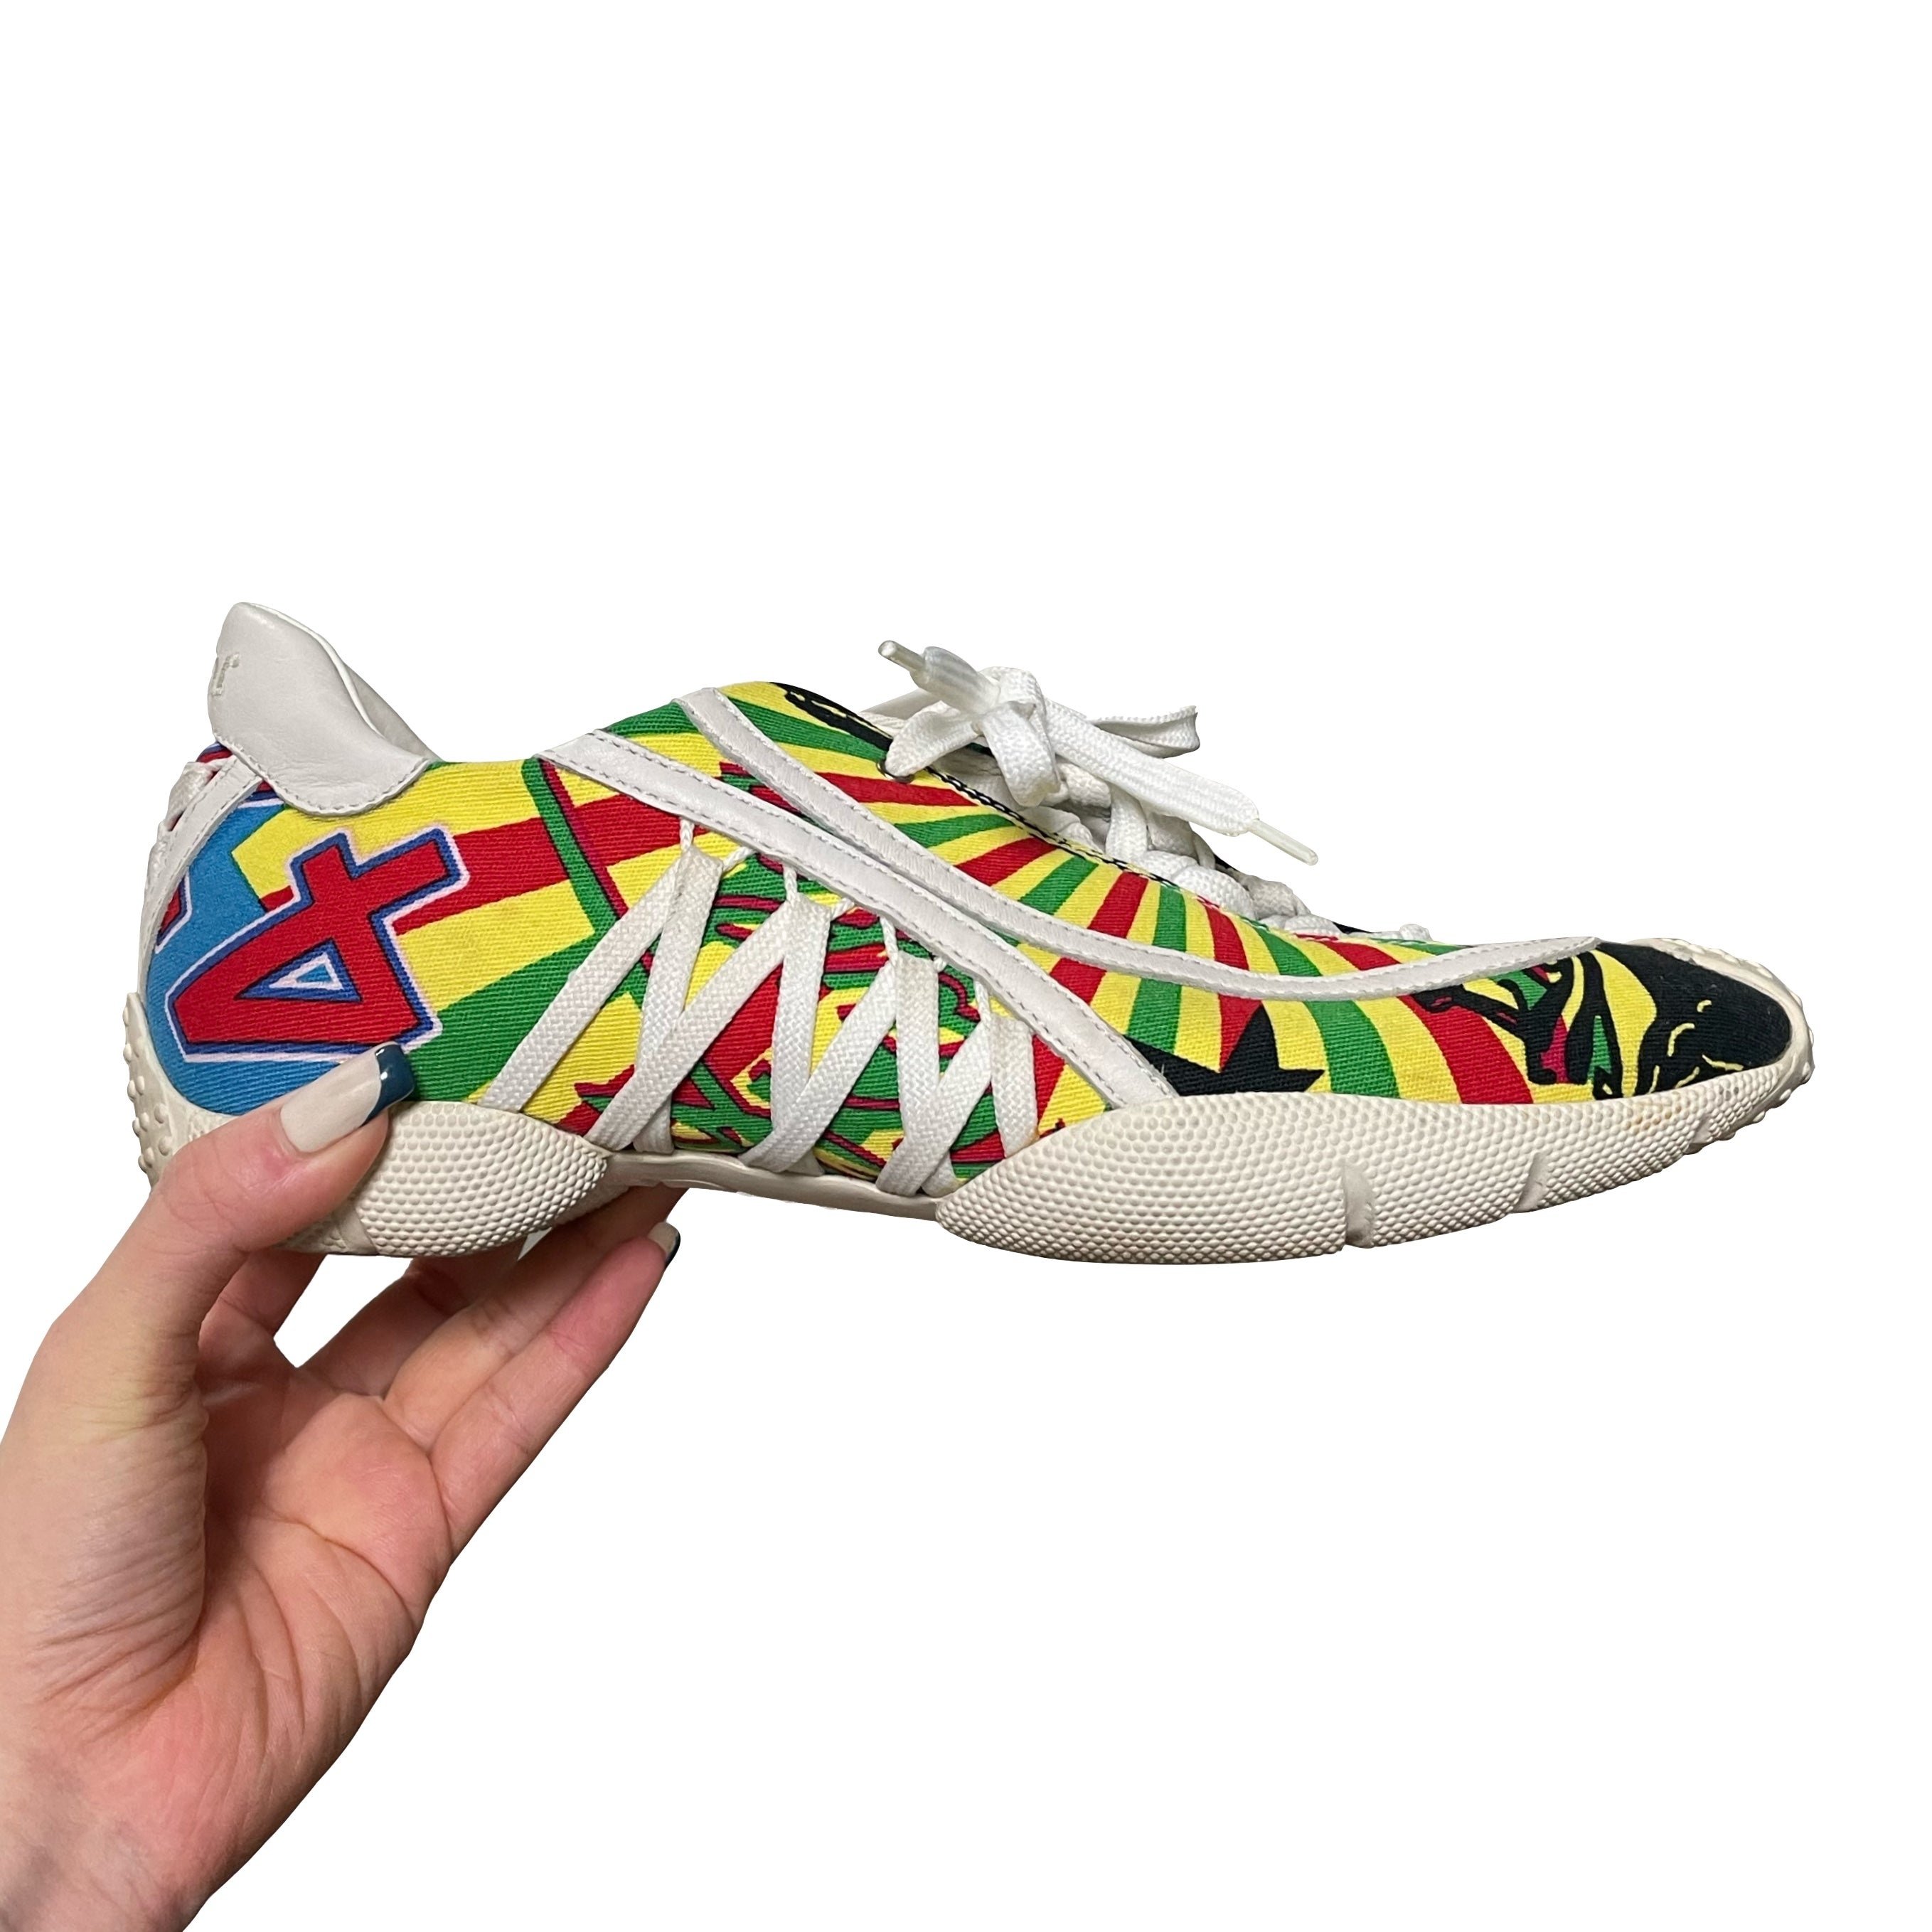 CHRISTIAN DIOR Fall Winter 2003 Rasta Mania Laced Up Sneakers - 4